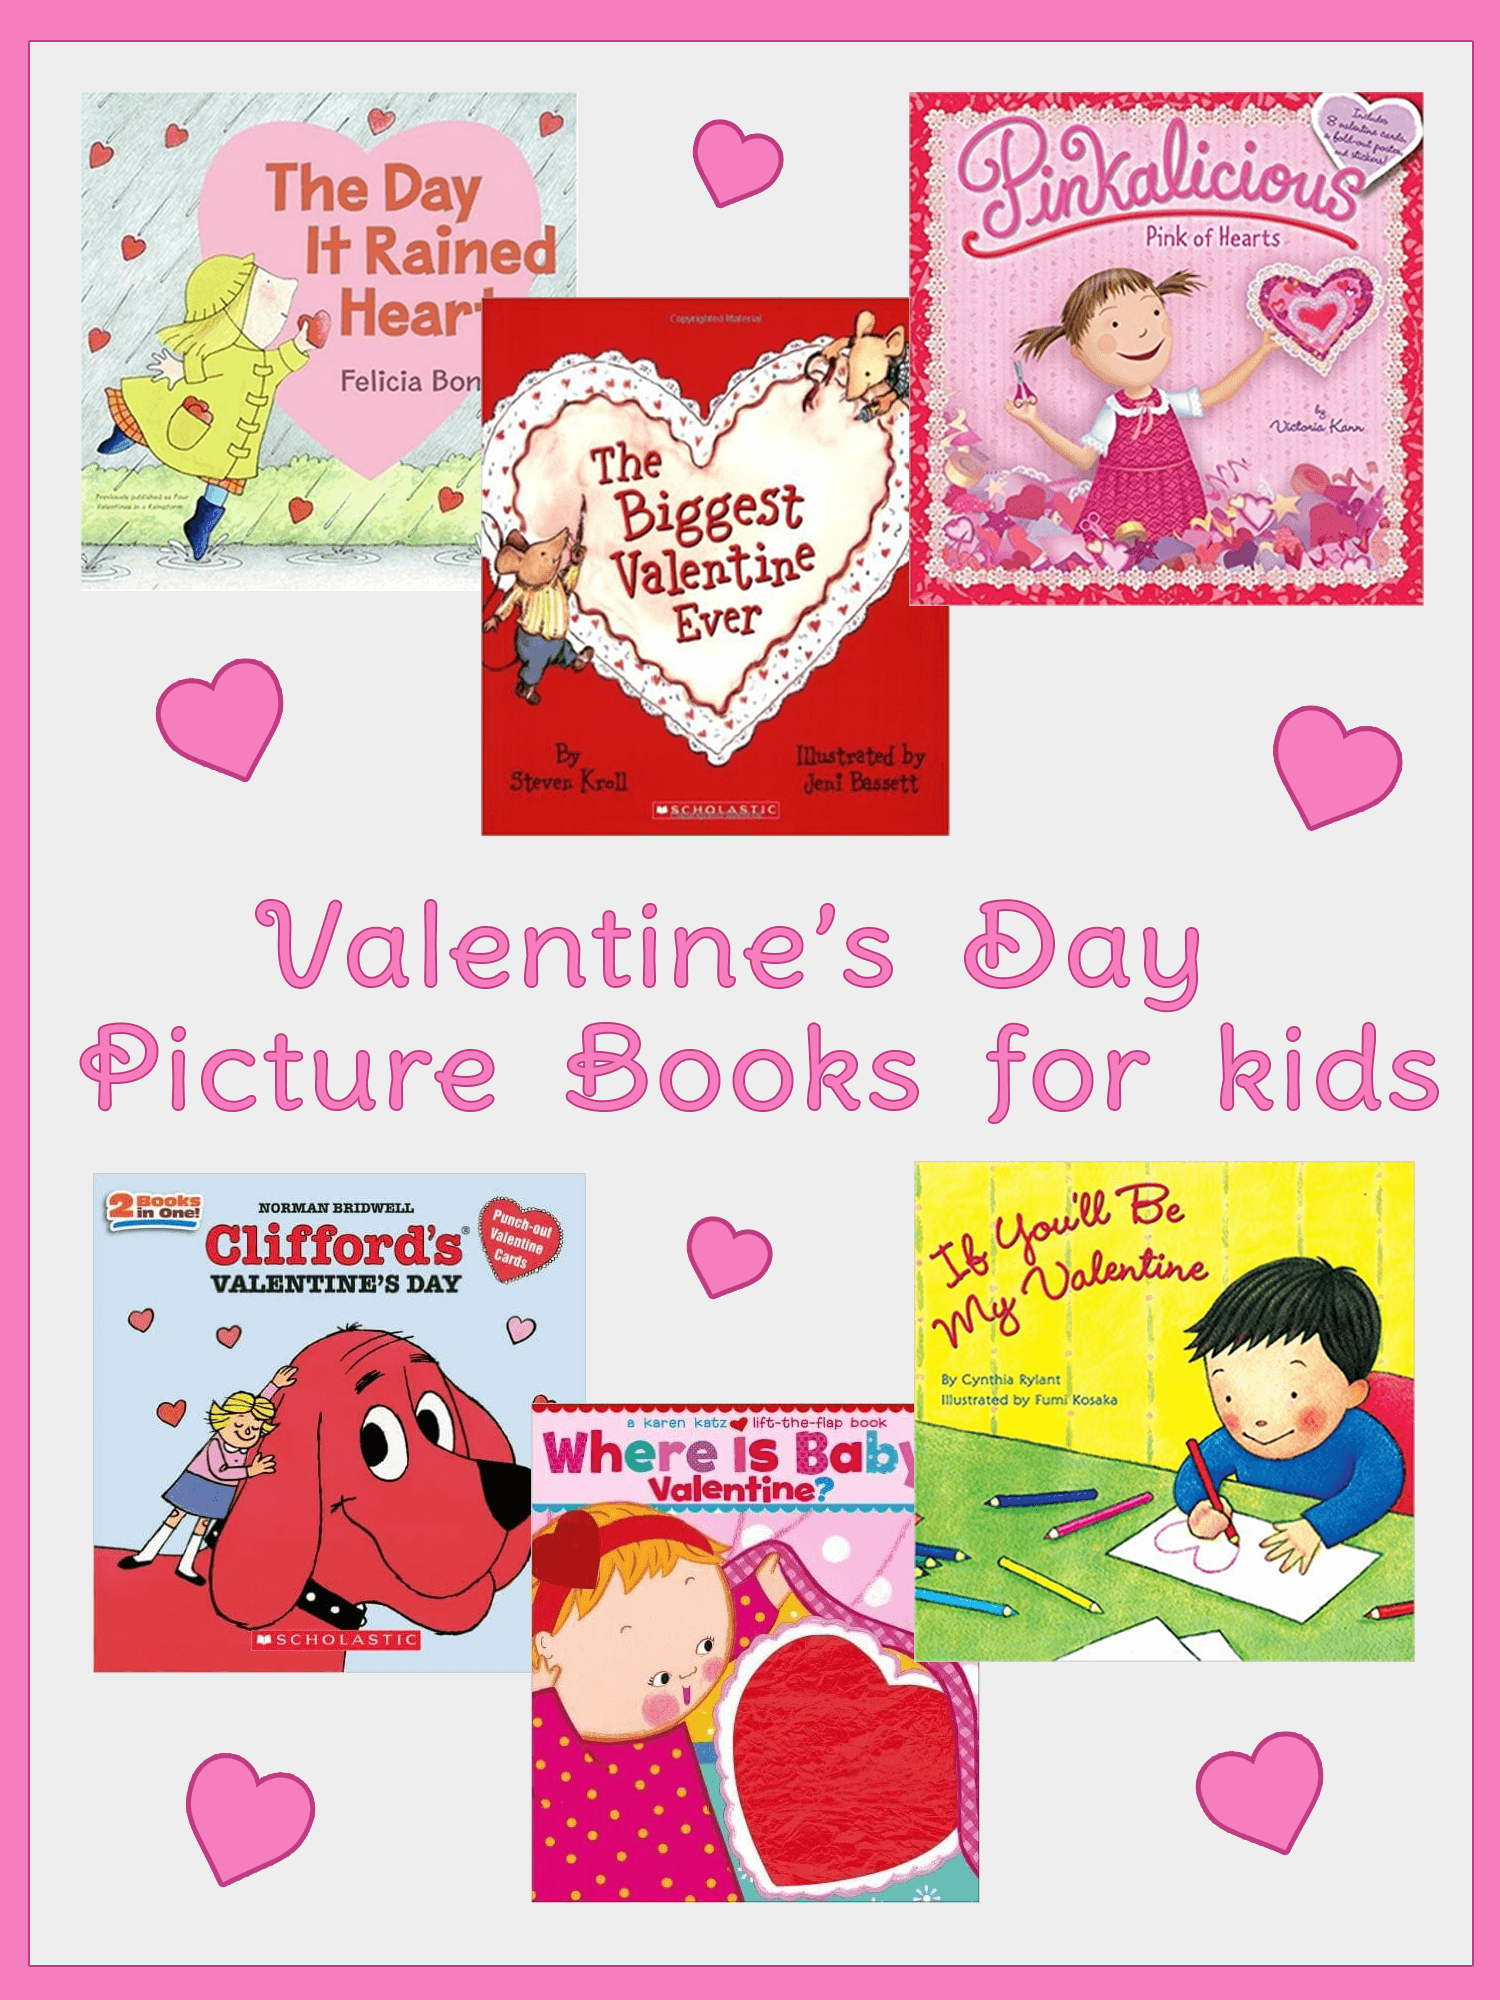 valentines day picture books for kids_imagine forest V2